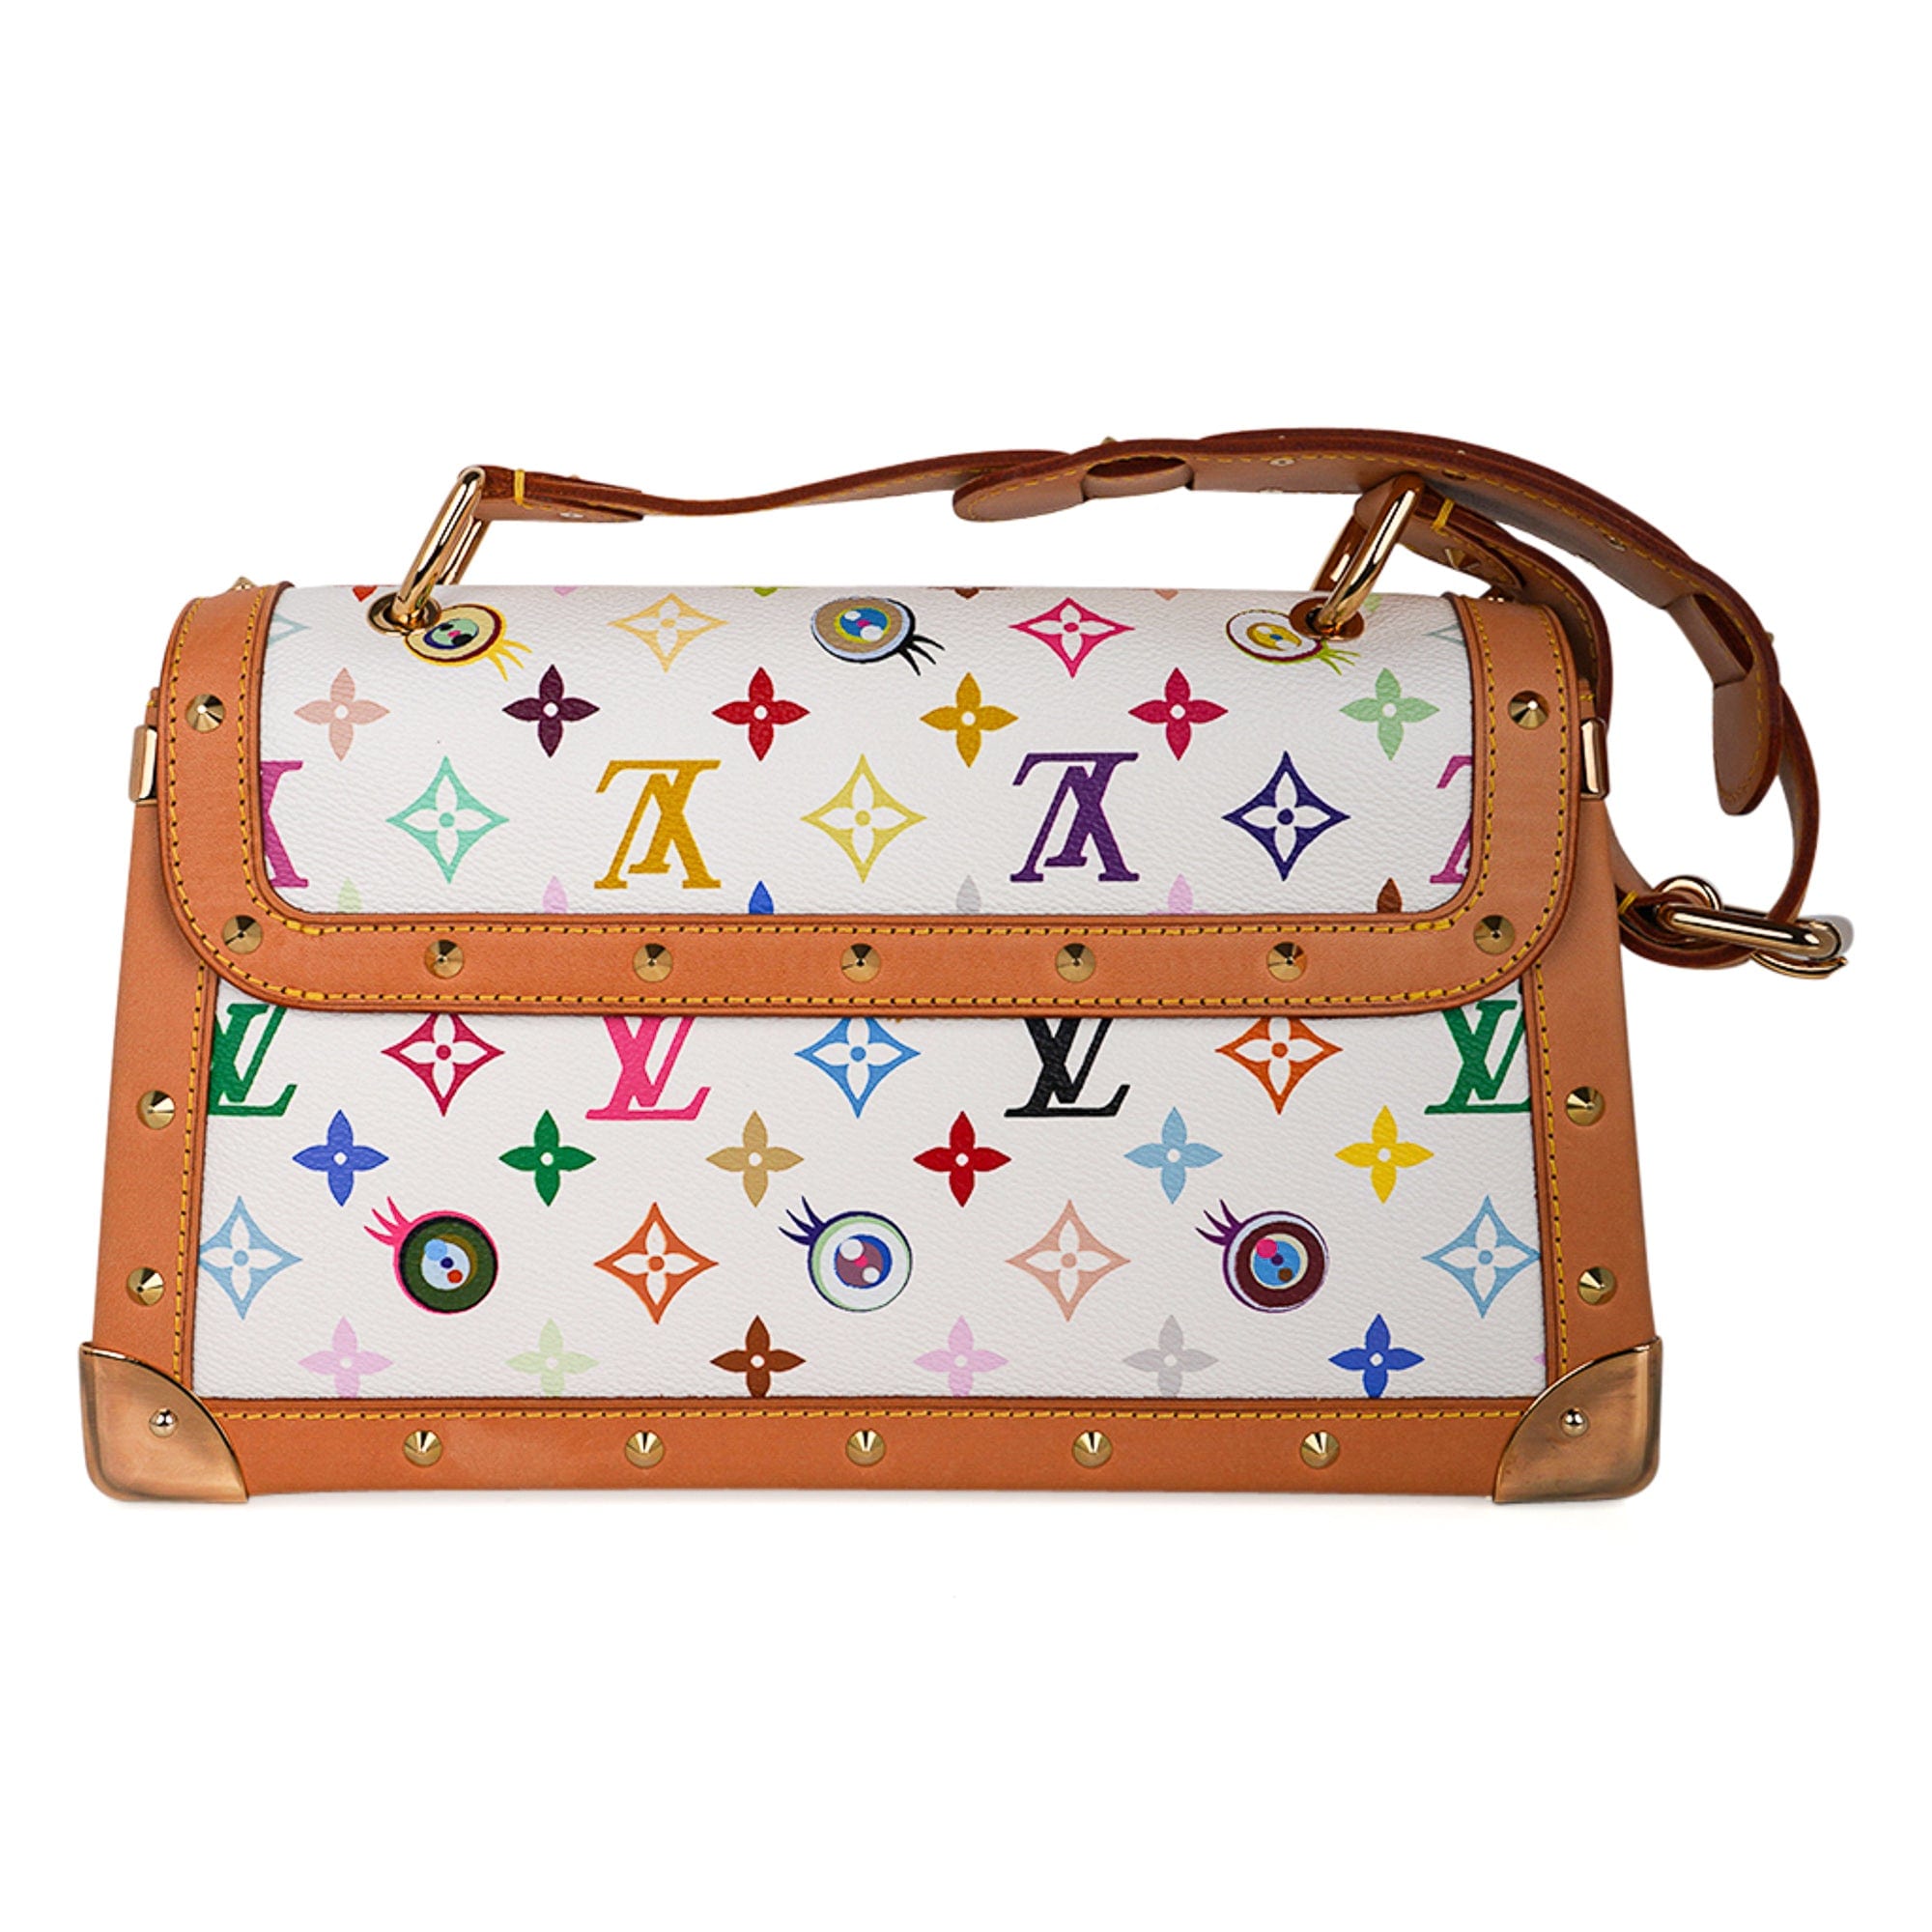 The hand bag pink Louis Vuitton x Murakami to the grounds of